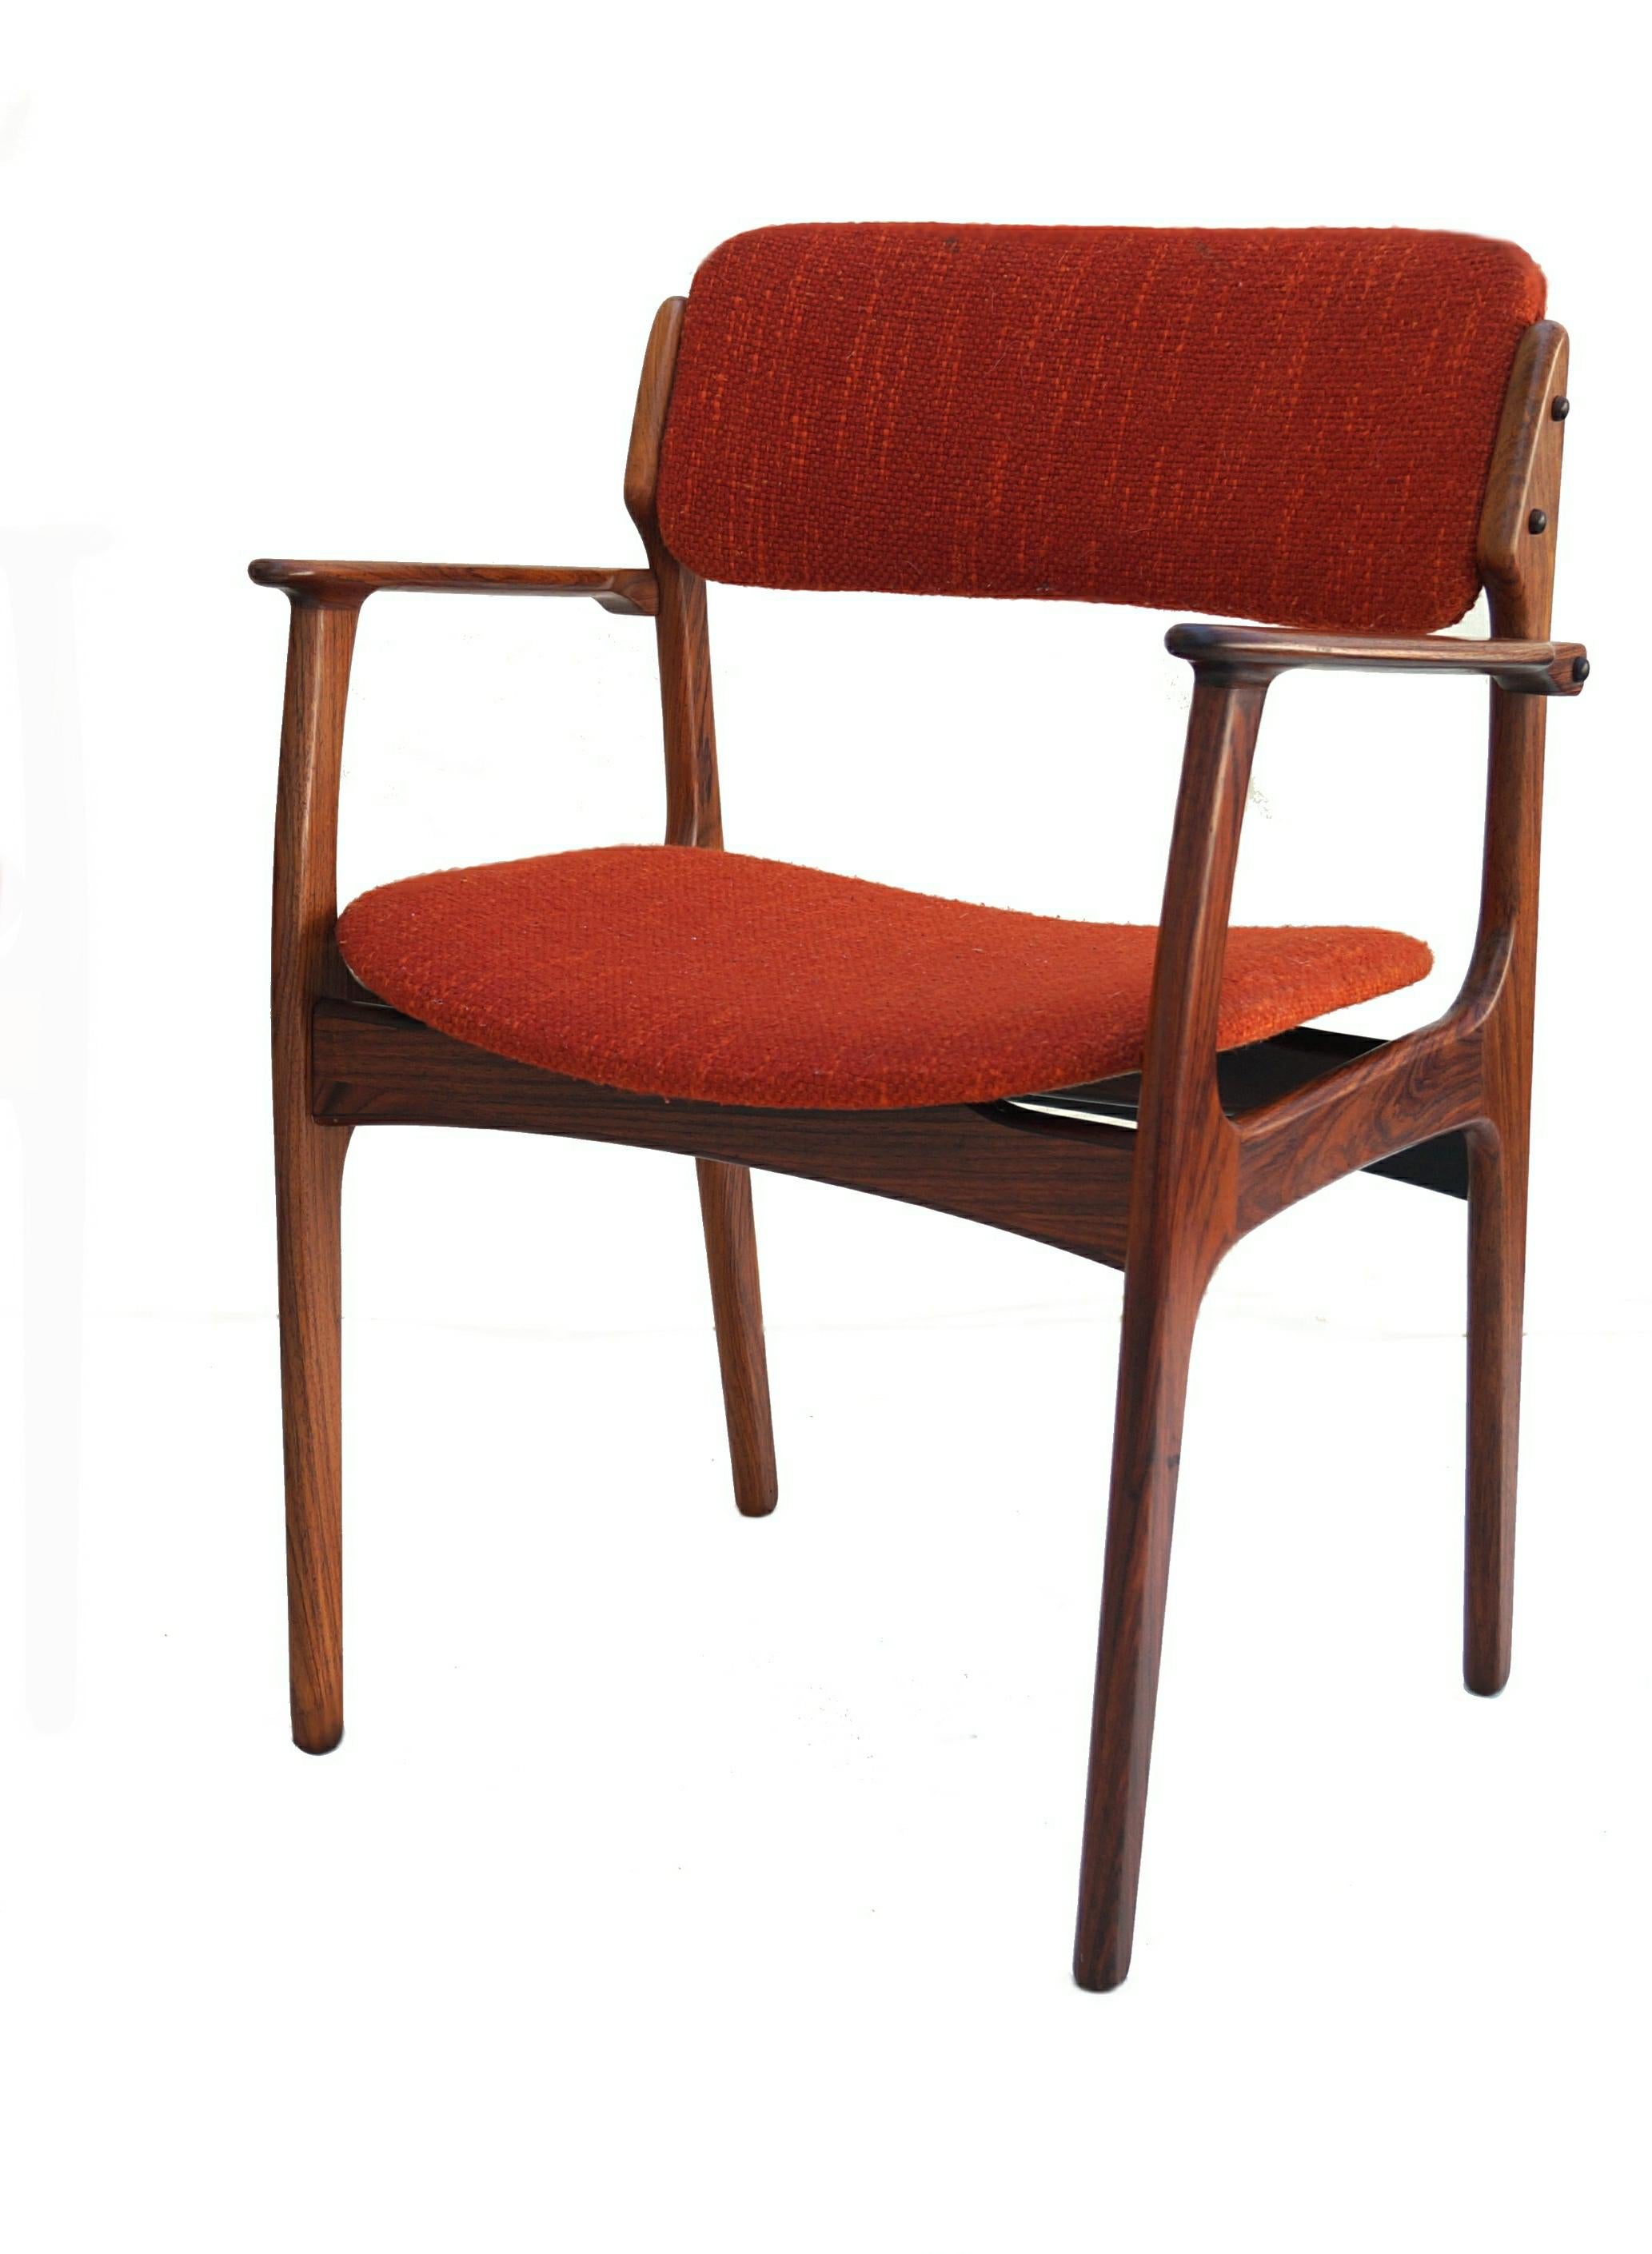 Mid-20th Century Pair Rosewood Mid-Century Danish Modern Arm Chair Chairs Erik Buch Model 50 For Sale